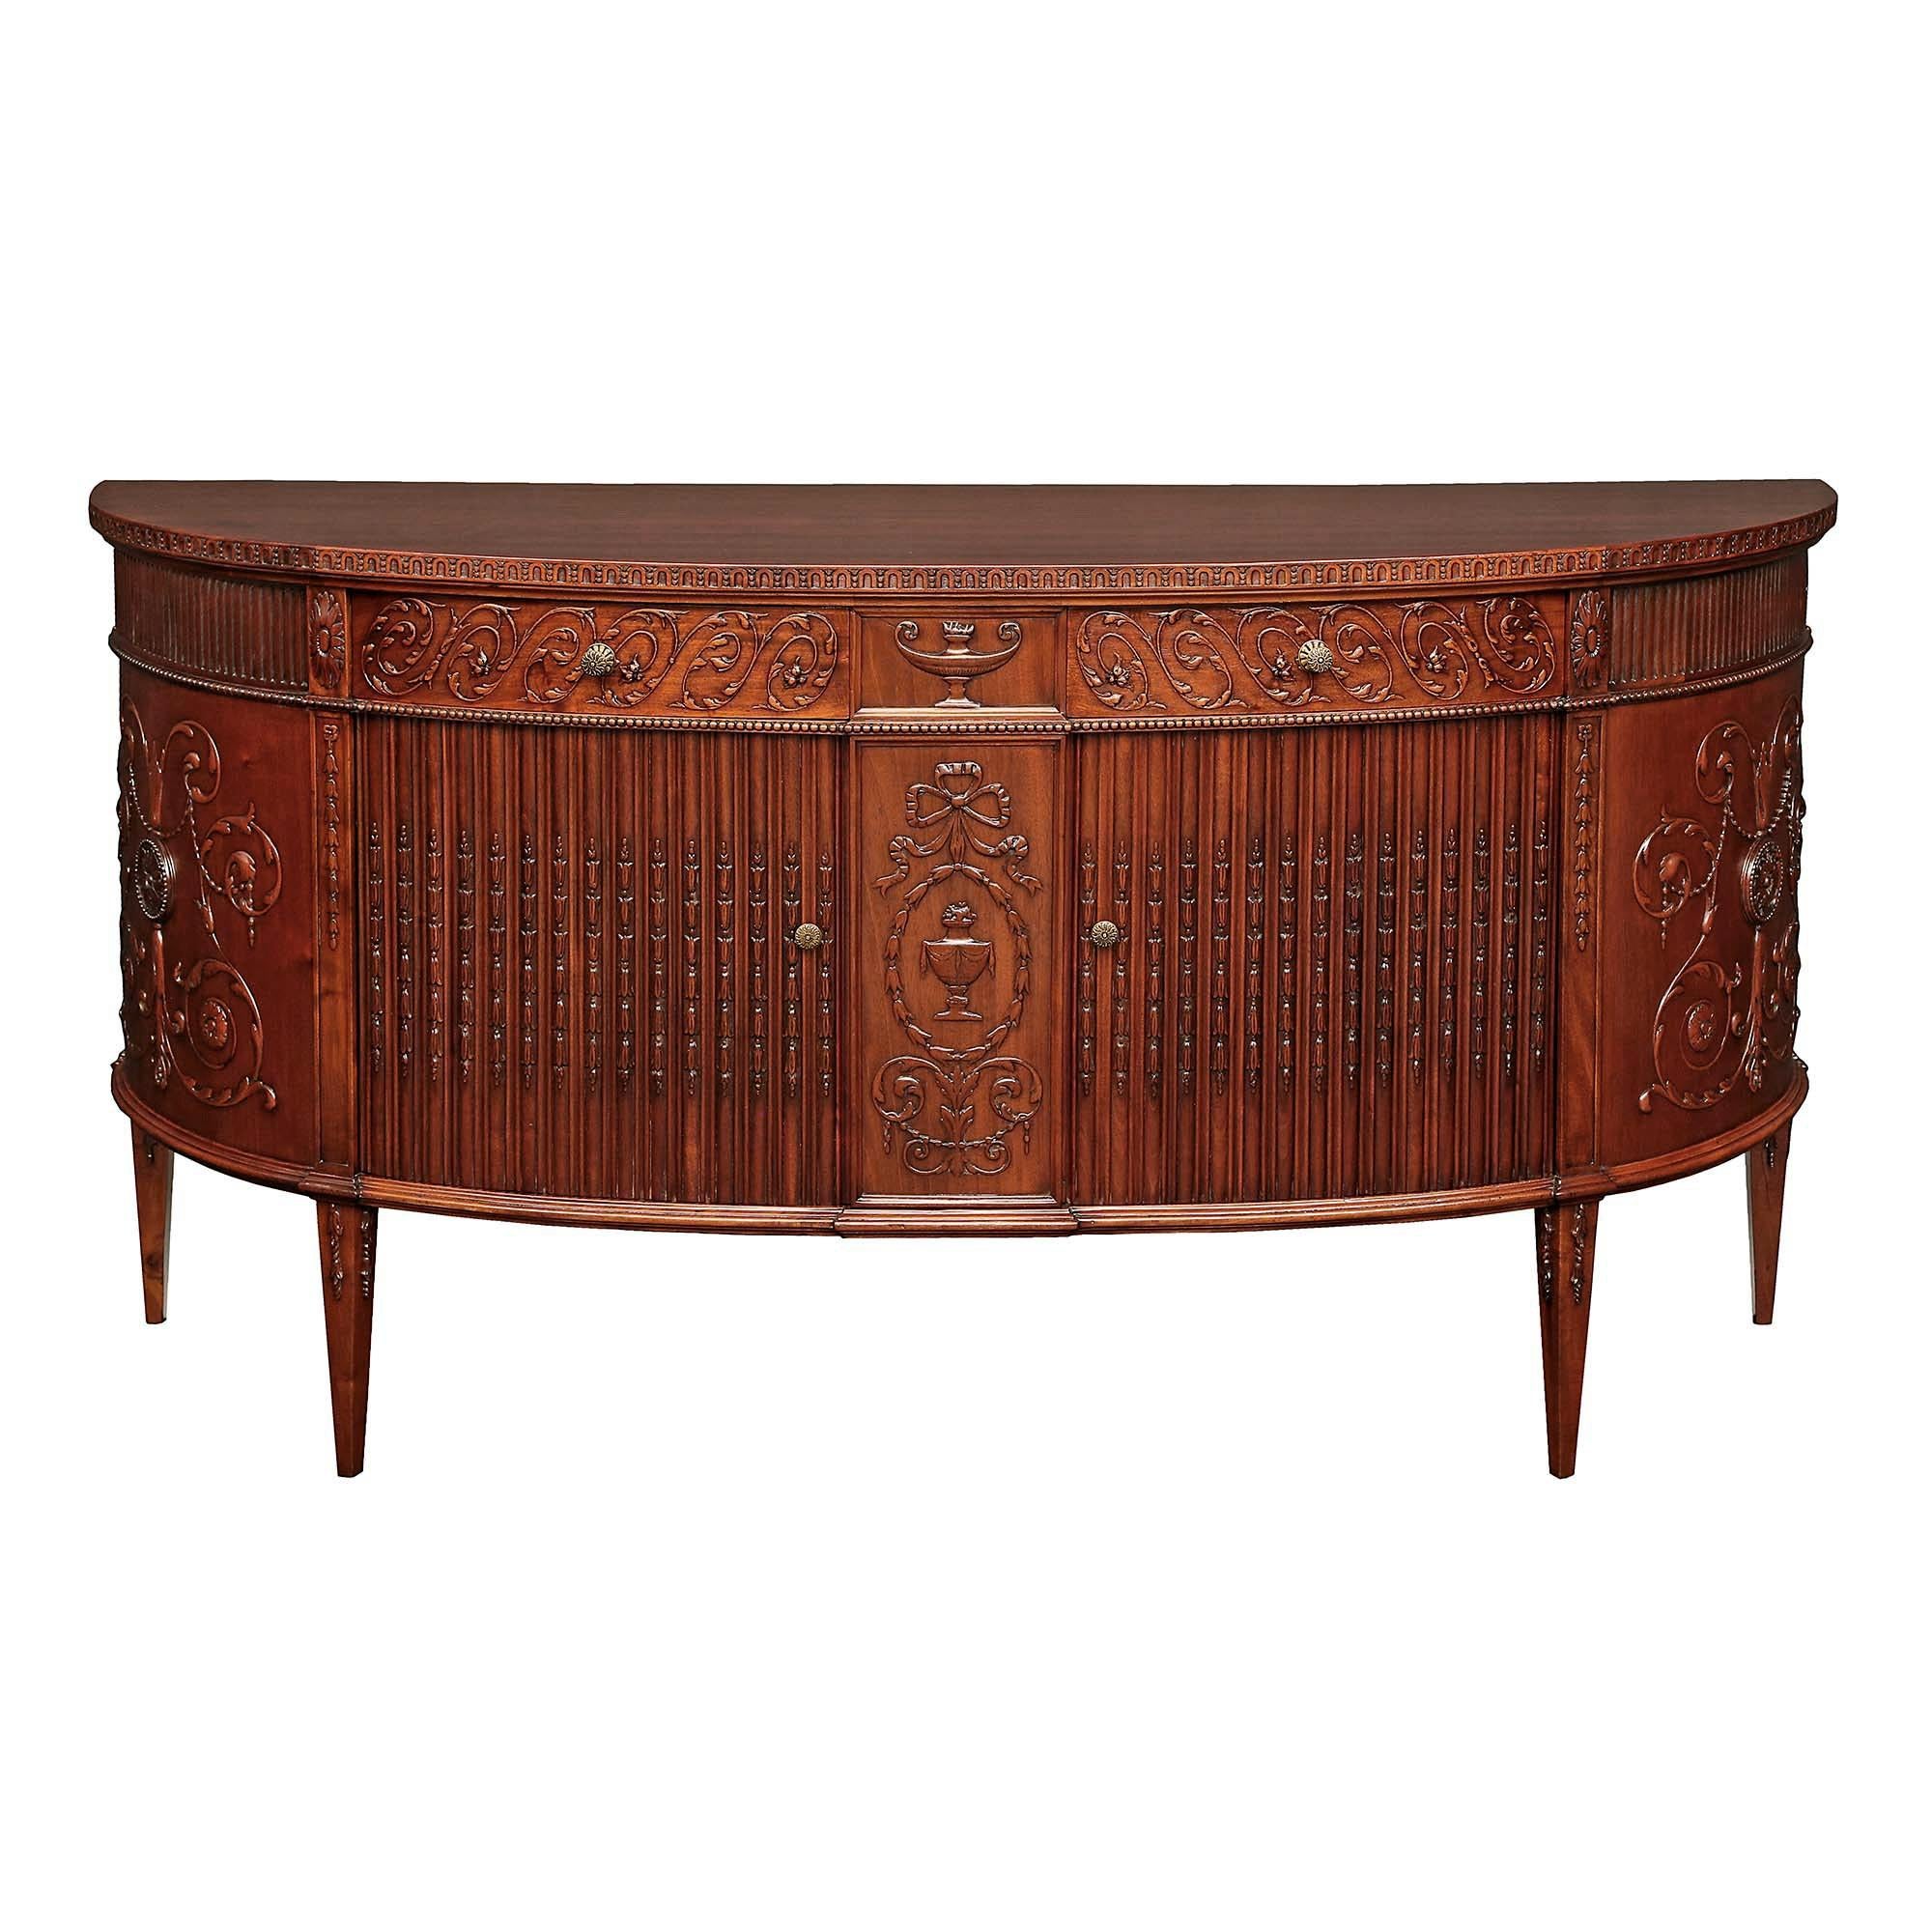 An outstanding English 19th century Regency mahogany two door, two drawer sideboard buffet. The buffet is raised by four square tapered legs with floral carvings. At the center is a finely carved urn on a recessed panel, framed within a tied ribbon